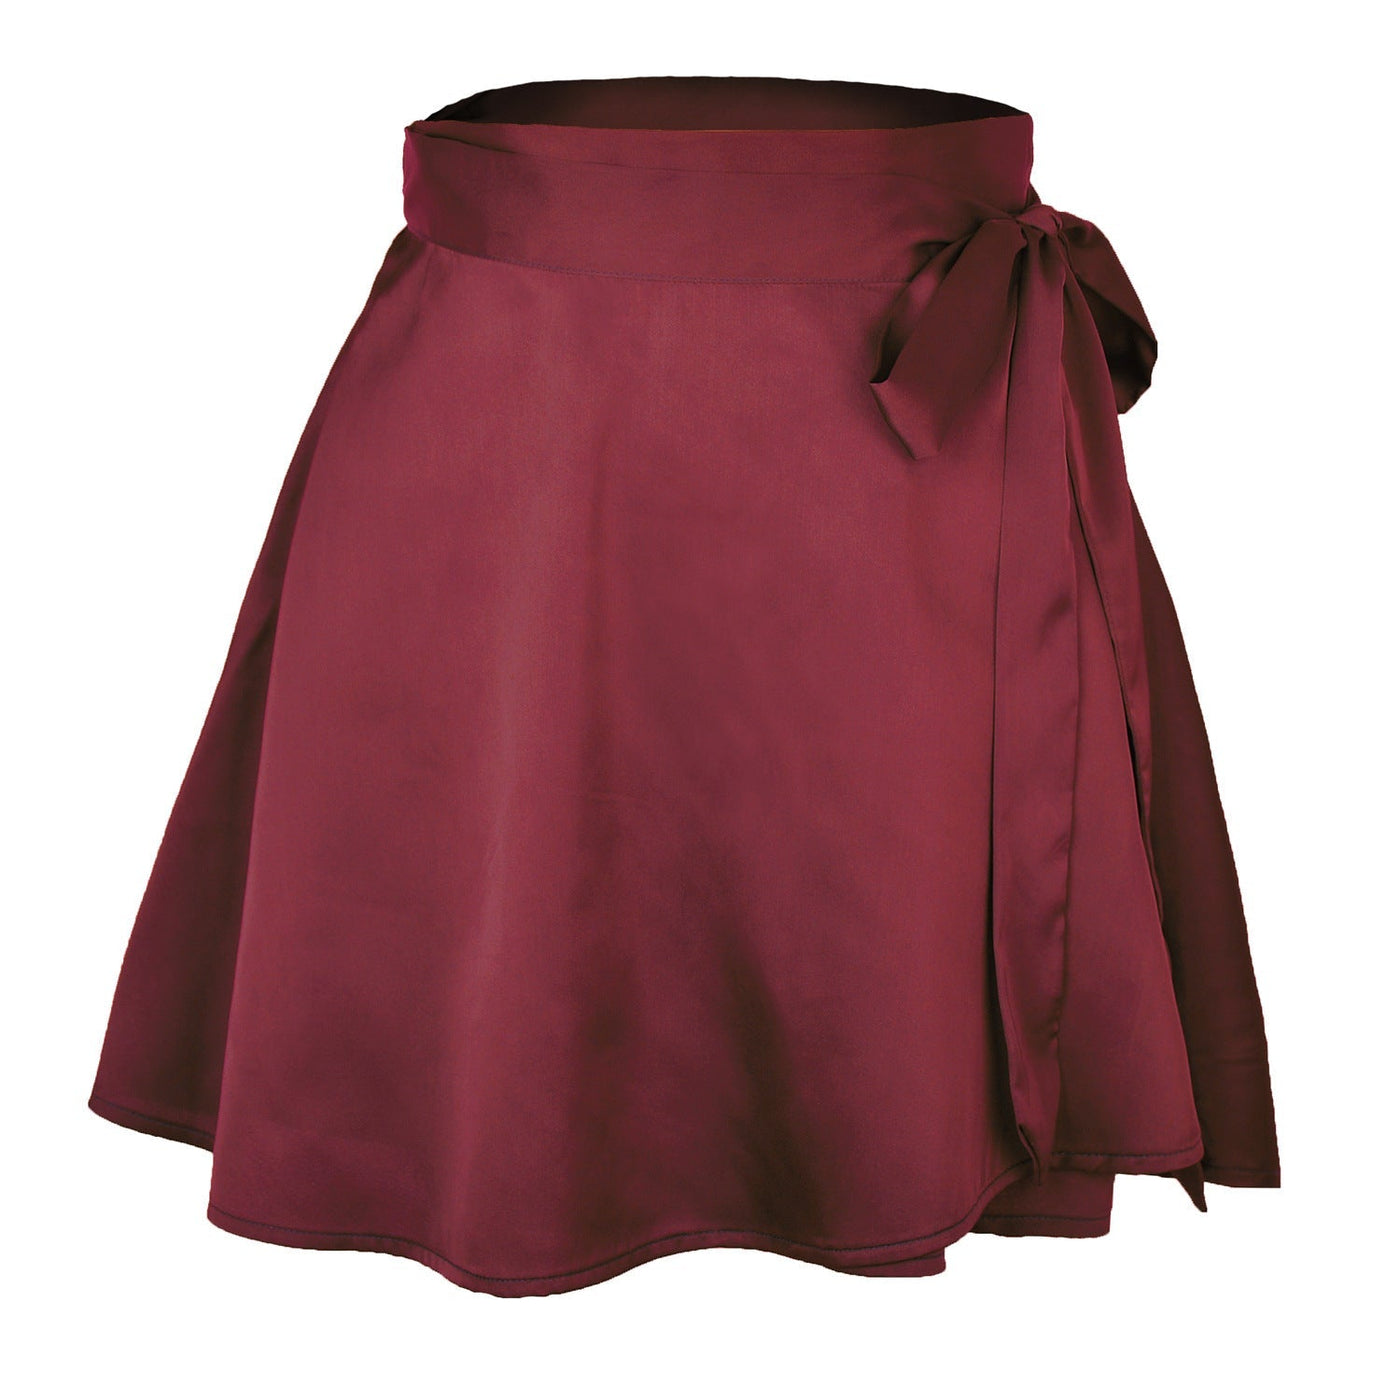 NTG Fad S / Wine High Waist Lace-Up Loose Casual Chiffon Satin Mini Skirt Solid Color Elegant Skirts